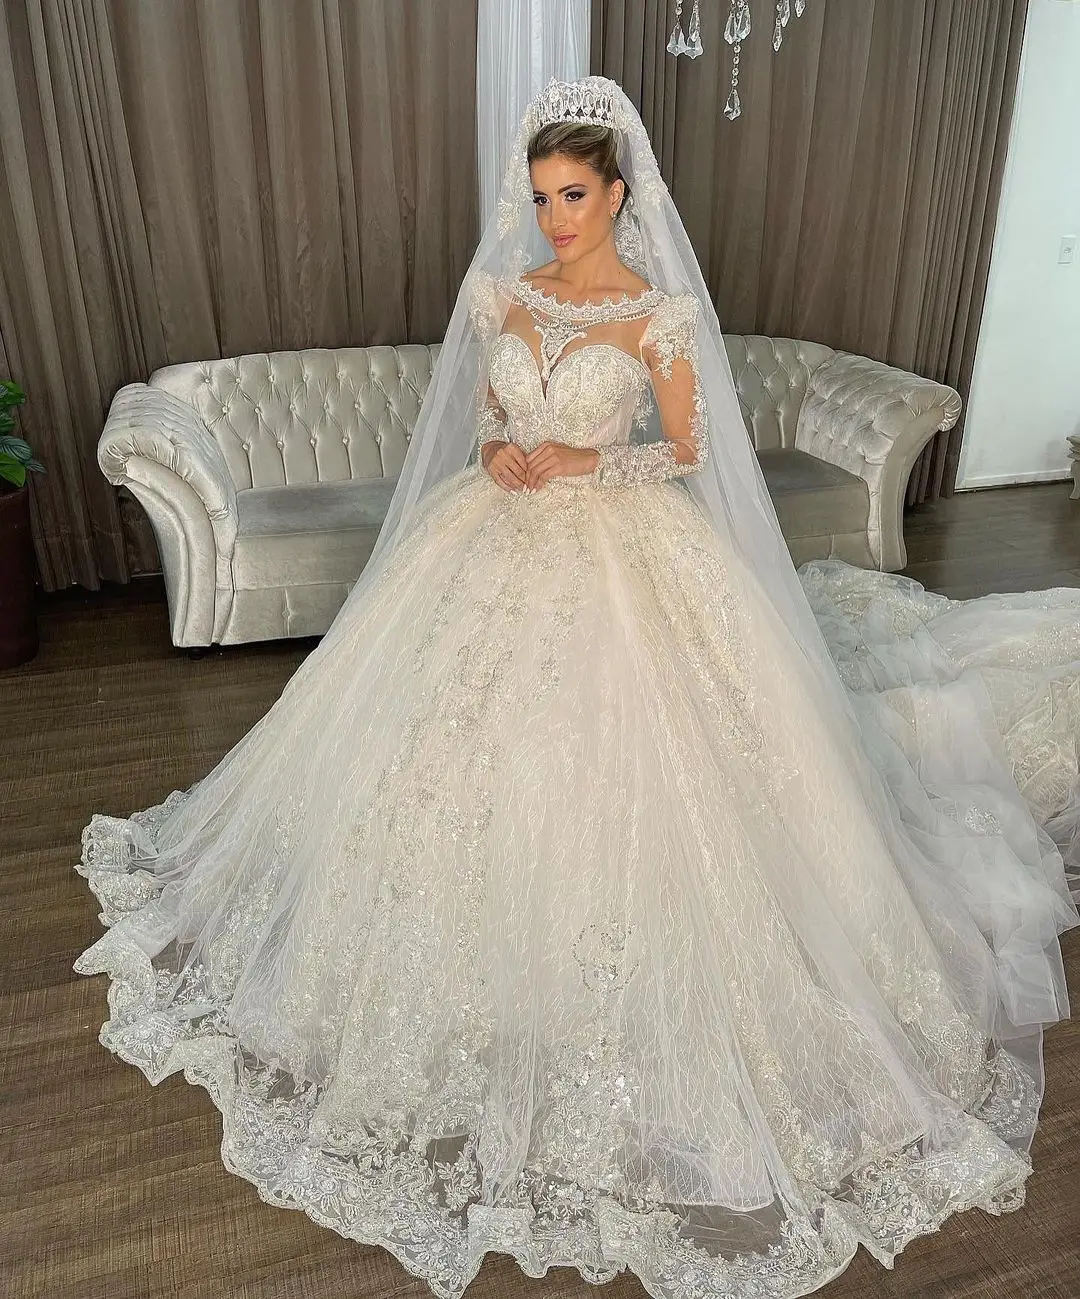 Arabic Boho Princess Butterfly Wedding Dress With 3D Butterfly Appliques,  Court Train, And Tulle Skirt From Sellonbest, $143.92 | DHgate.Com